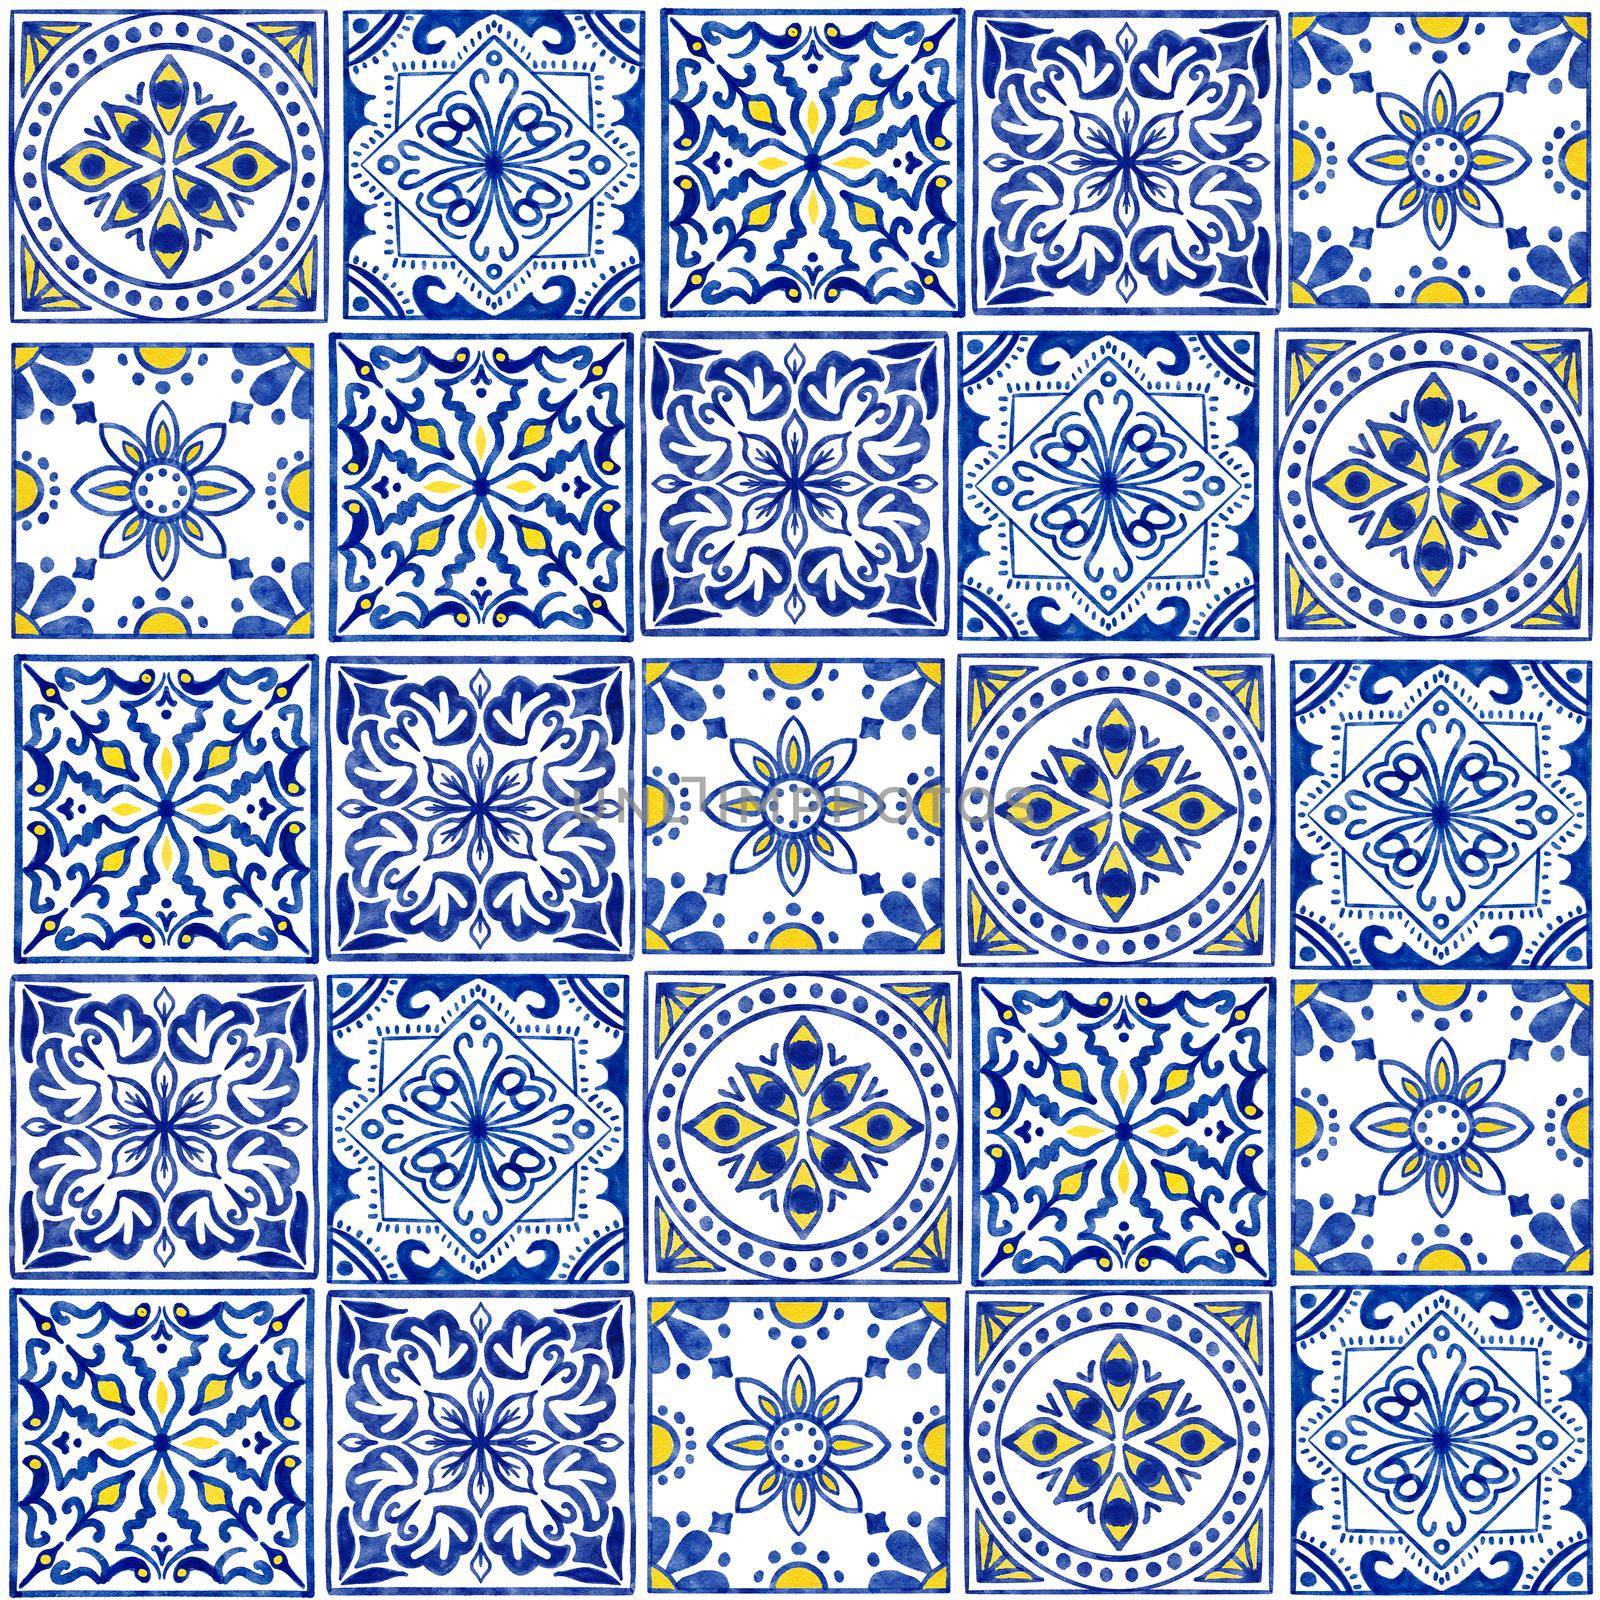 Hand drawn watercolor seamless pattern with blue white azulejo Portuguese ceramic traditional tiles. Ethnic portugal geomentric indigo repeated wall floor ornament. Arabic ornamental background. by Lagmar